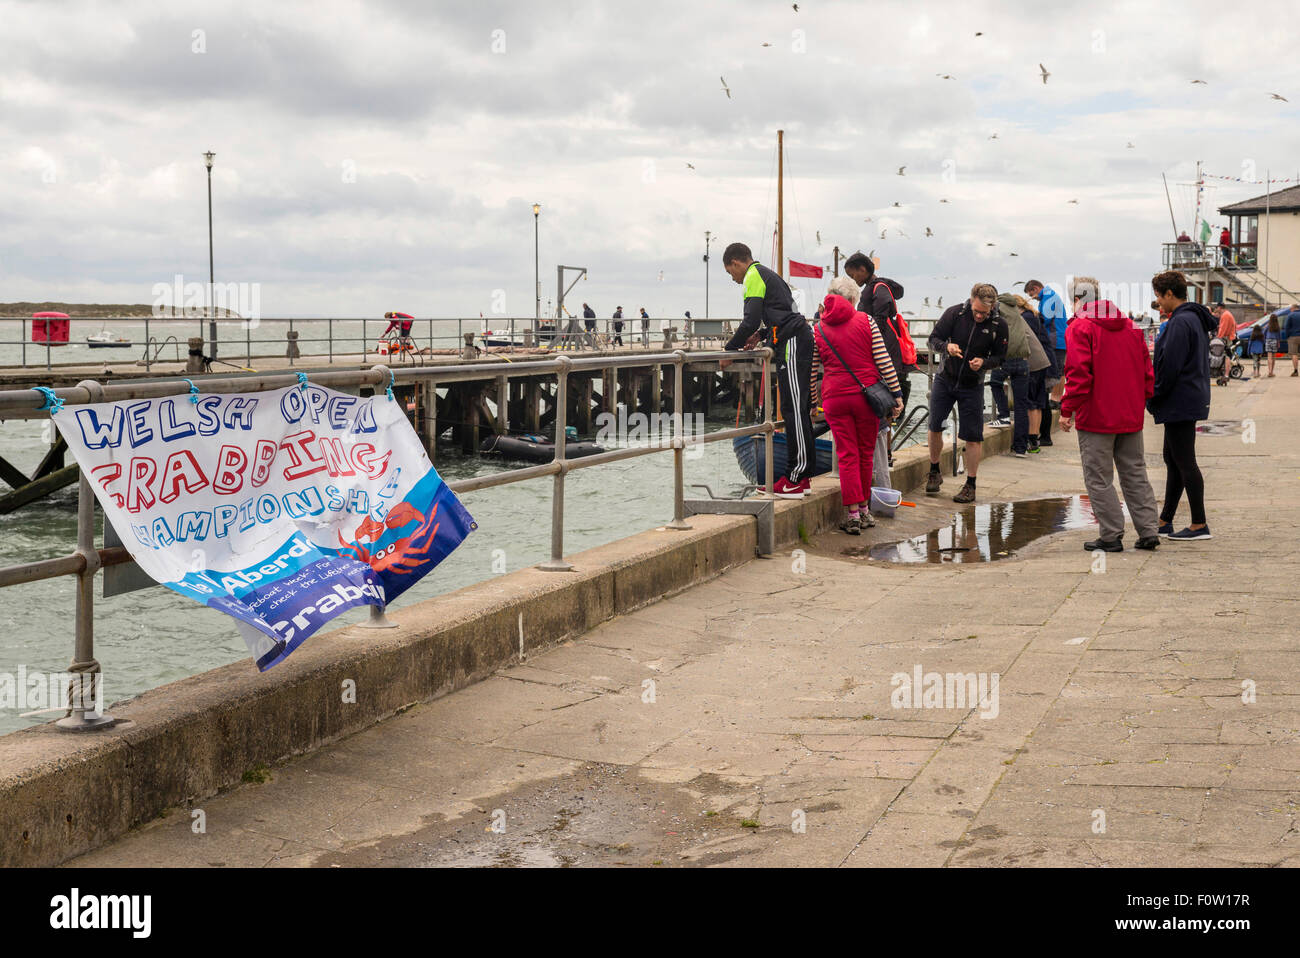 Families gather at the quayside to watch or participate in the Welsh open crabbing championship in Aberdyfi Wales. Stock Photo